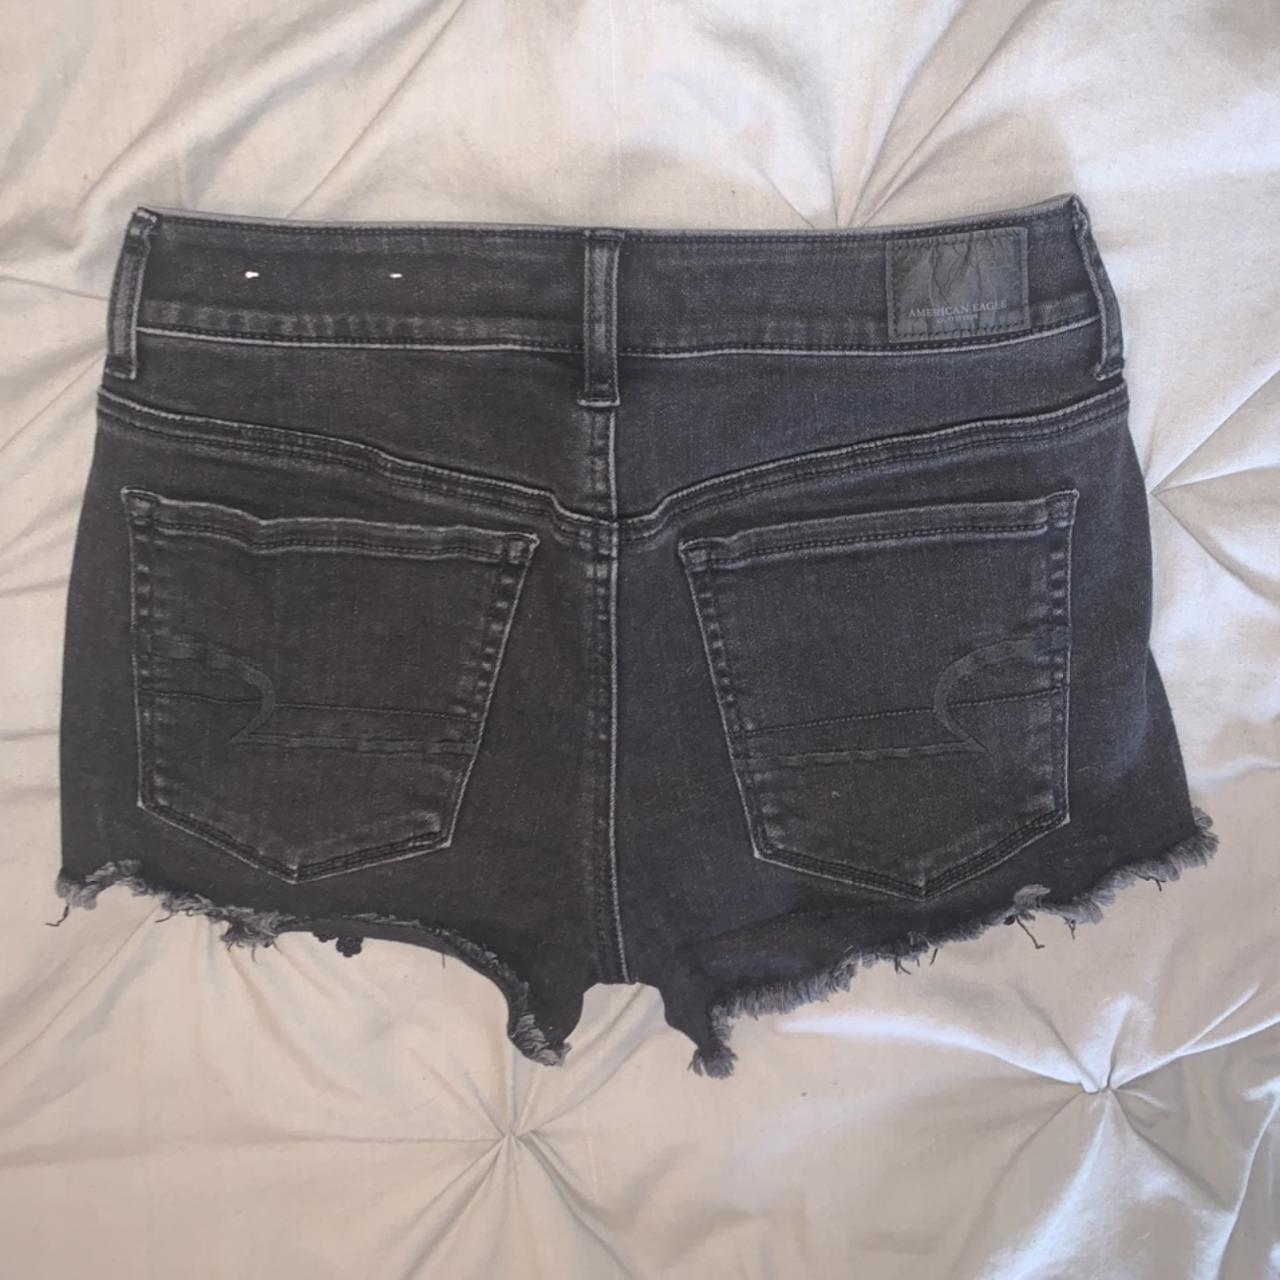 American Eagle Outfitters Women's Black Shorts (2)